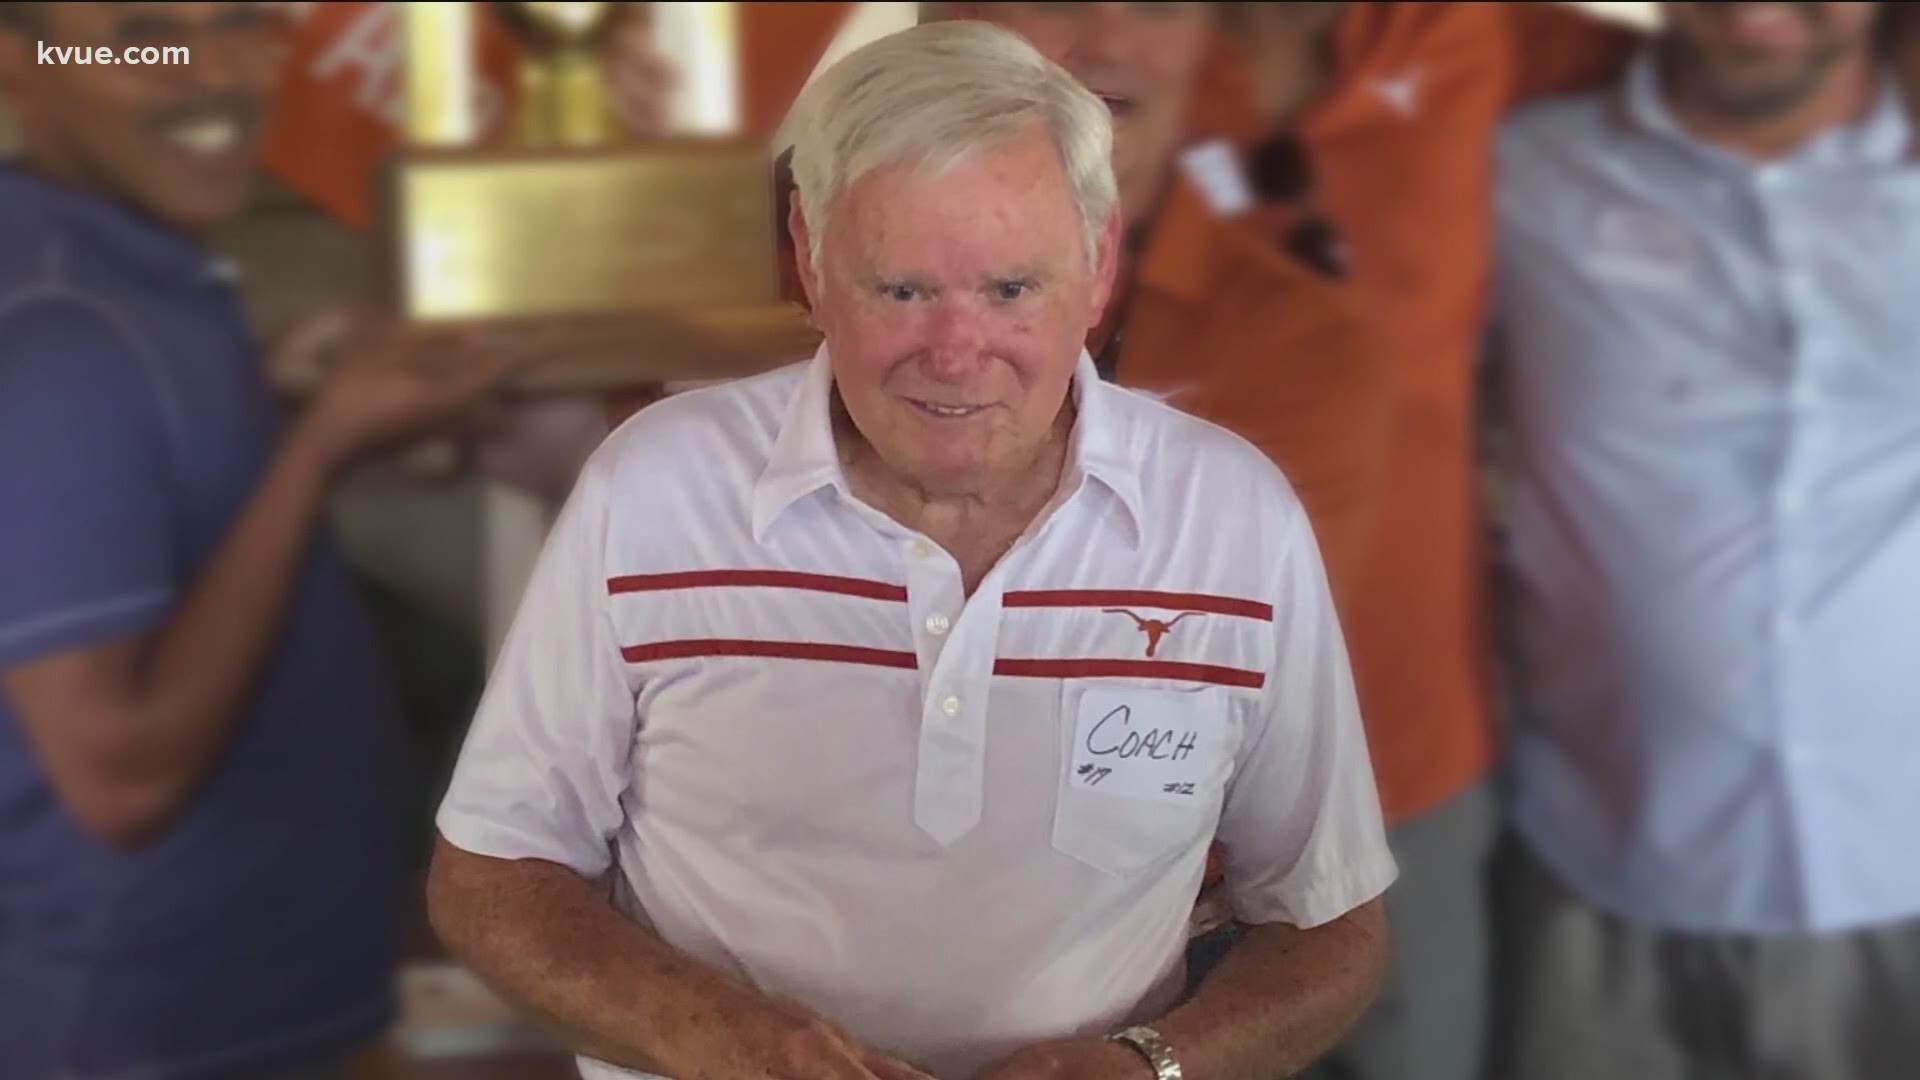 The UT community is mourning the loss of a Longhorn coaching legend. Fred Akers, a former head football coach, died at 82 on Monday.